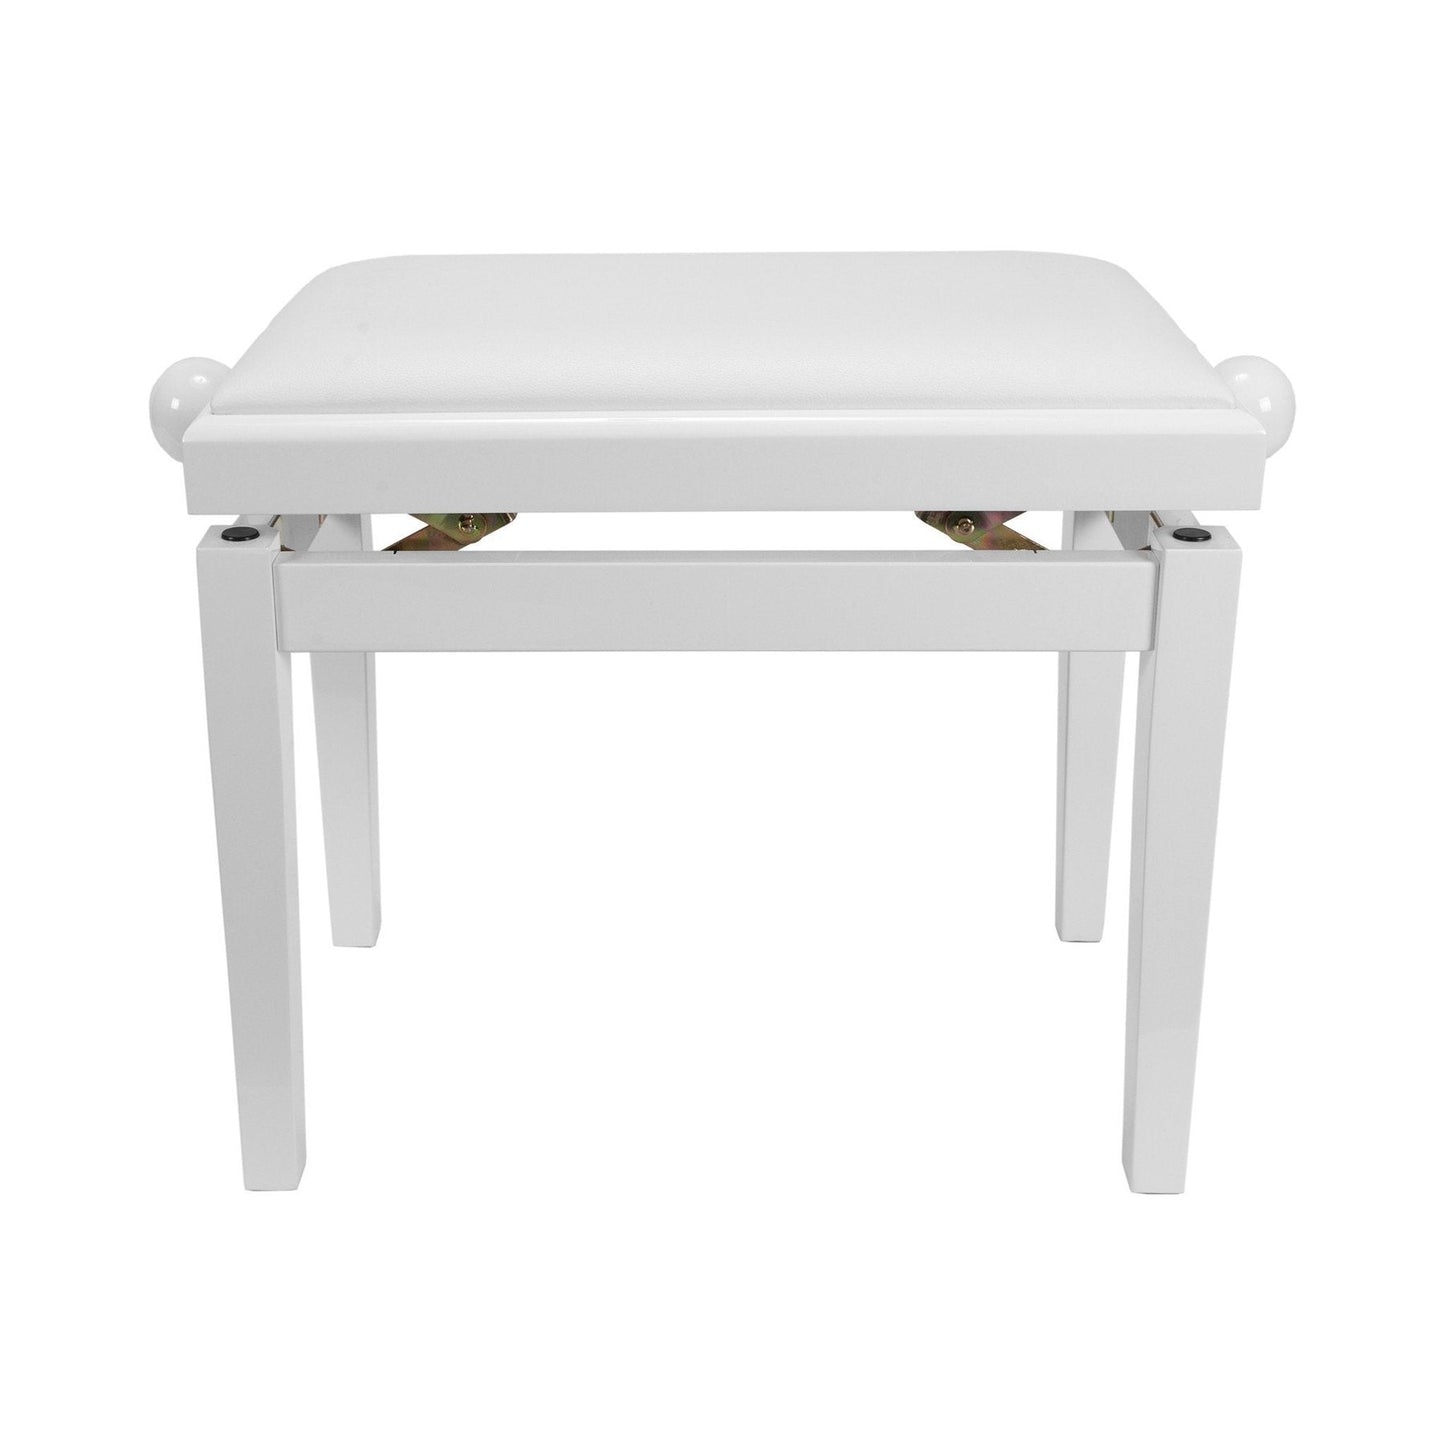 Crown Timber Trim Height Adjustable Piano Stool (White)